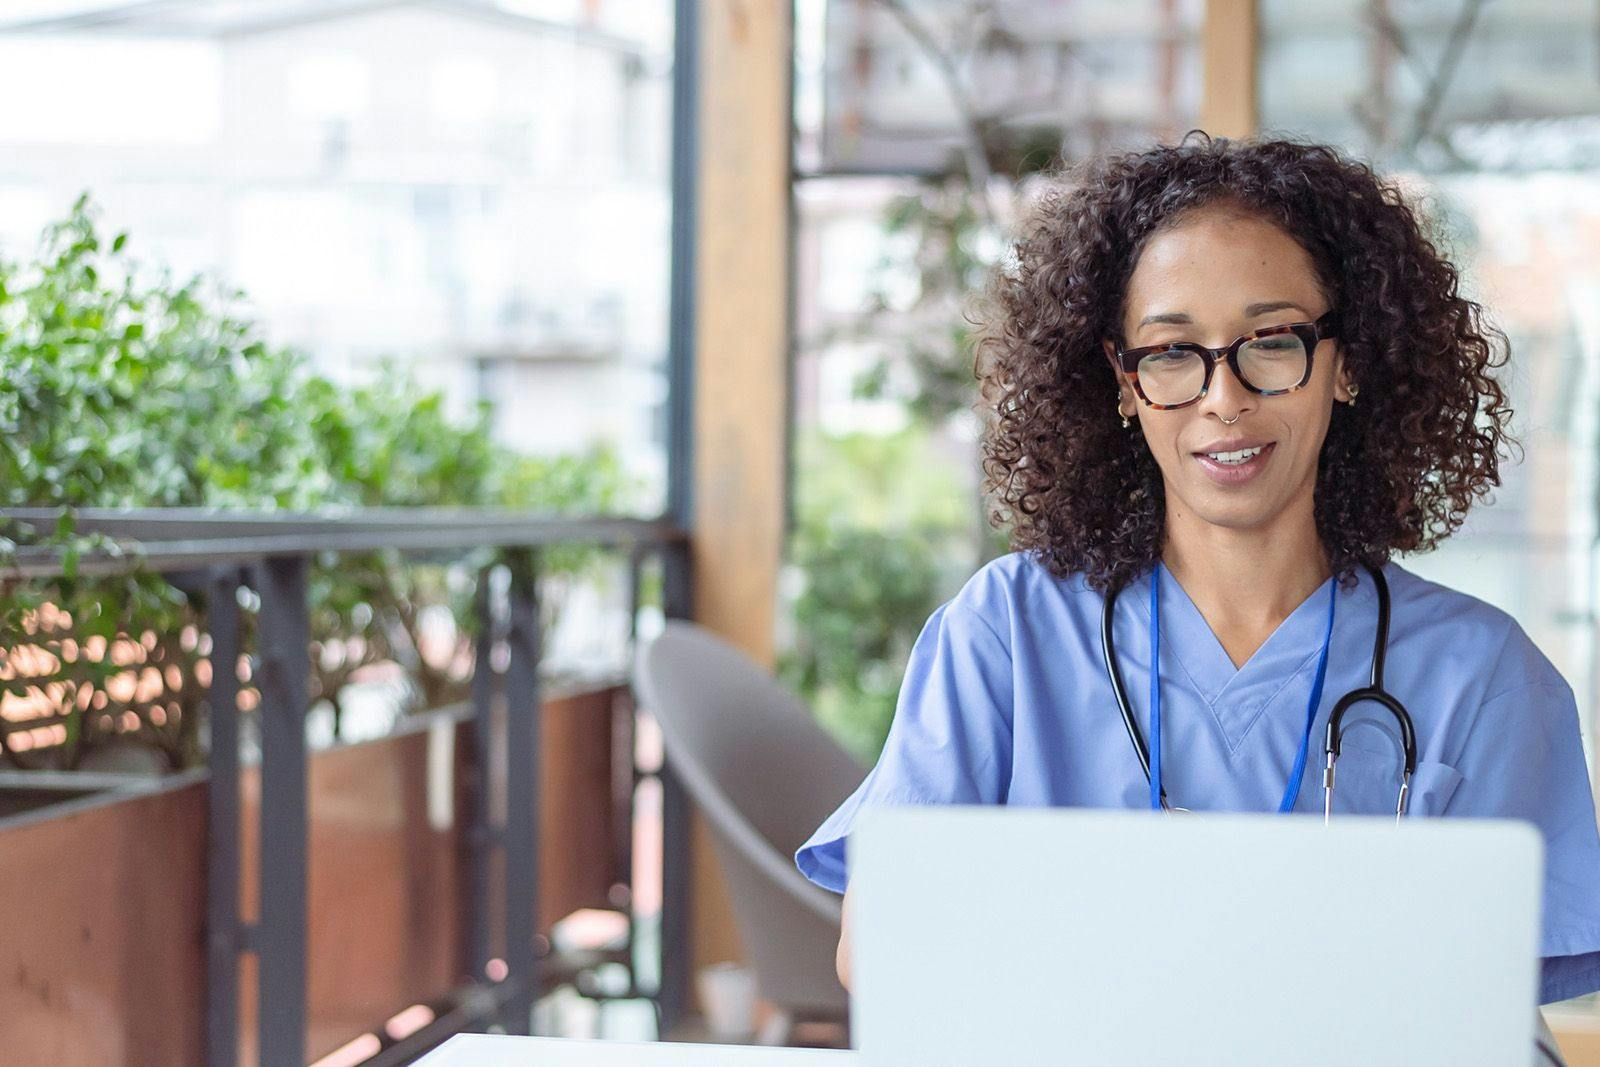 What’s it Like Working from Home as a Medical Biller and Coder?